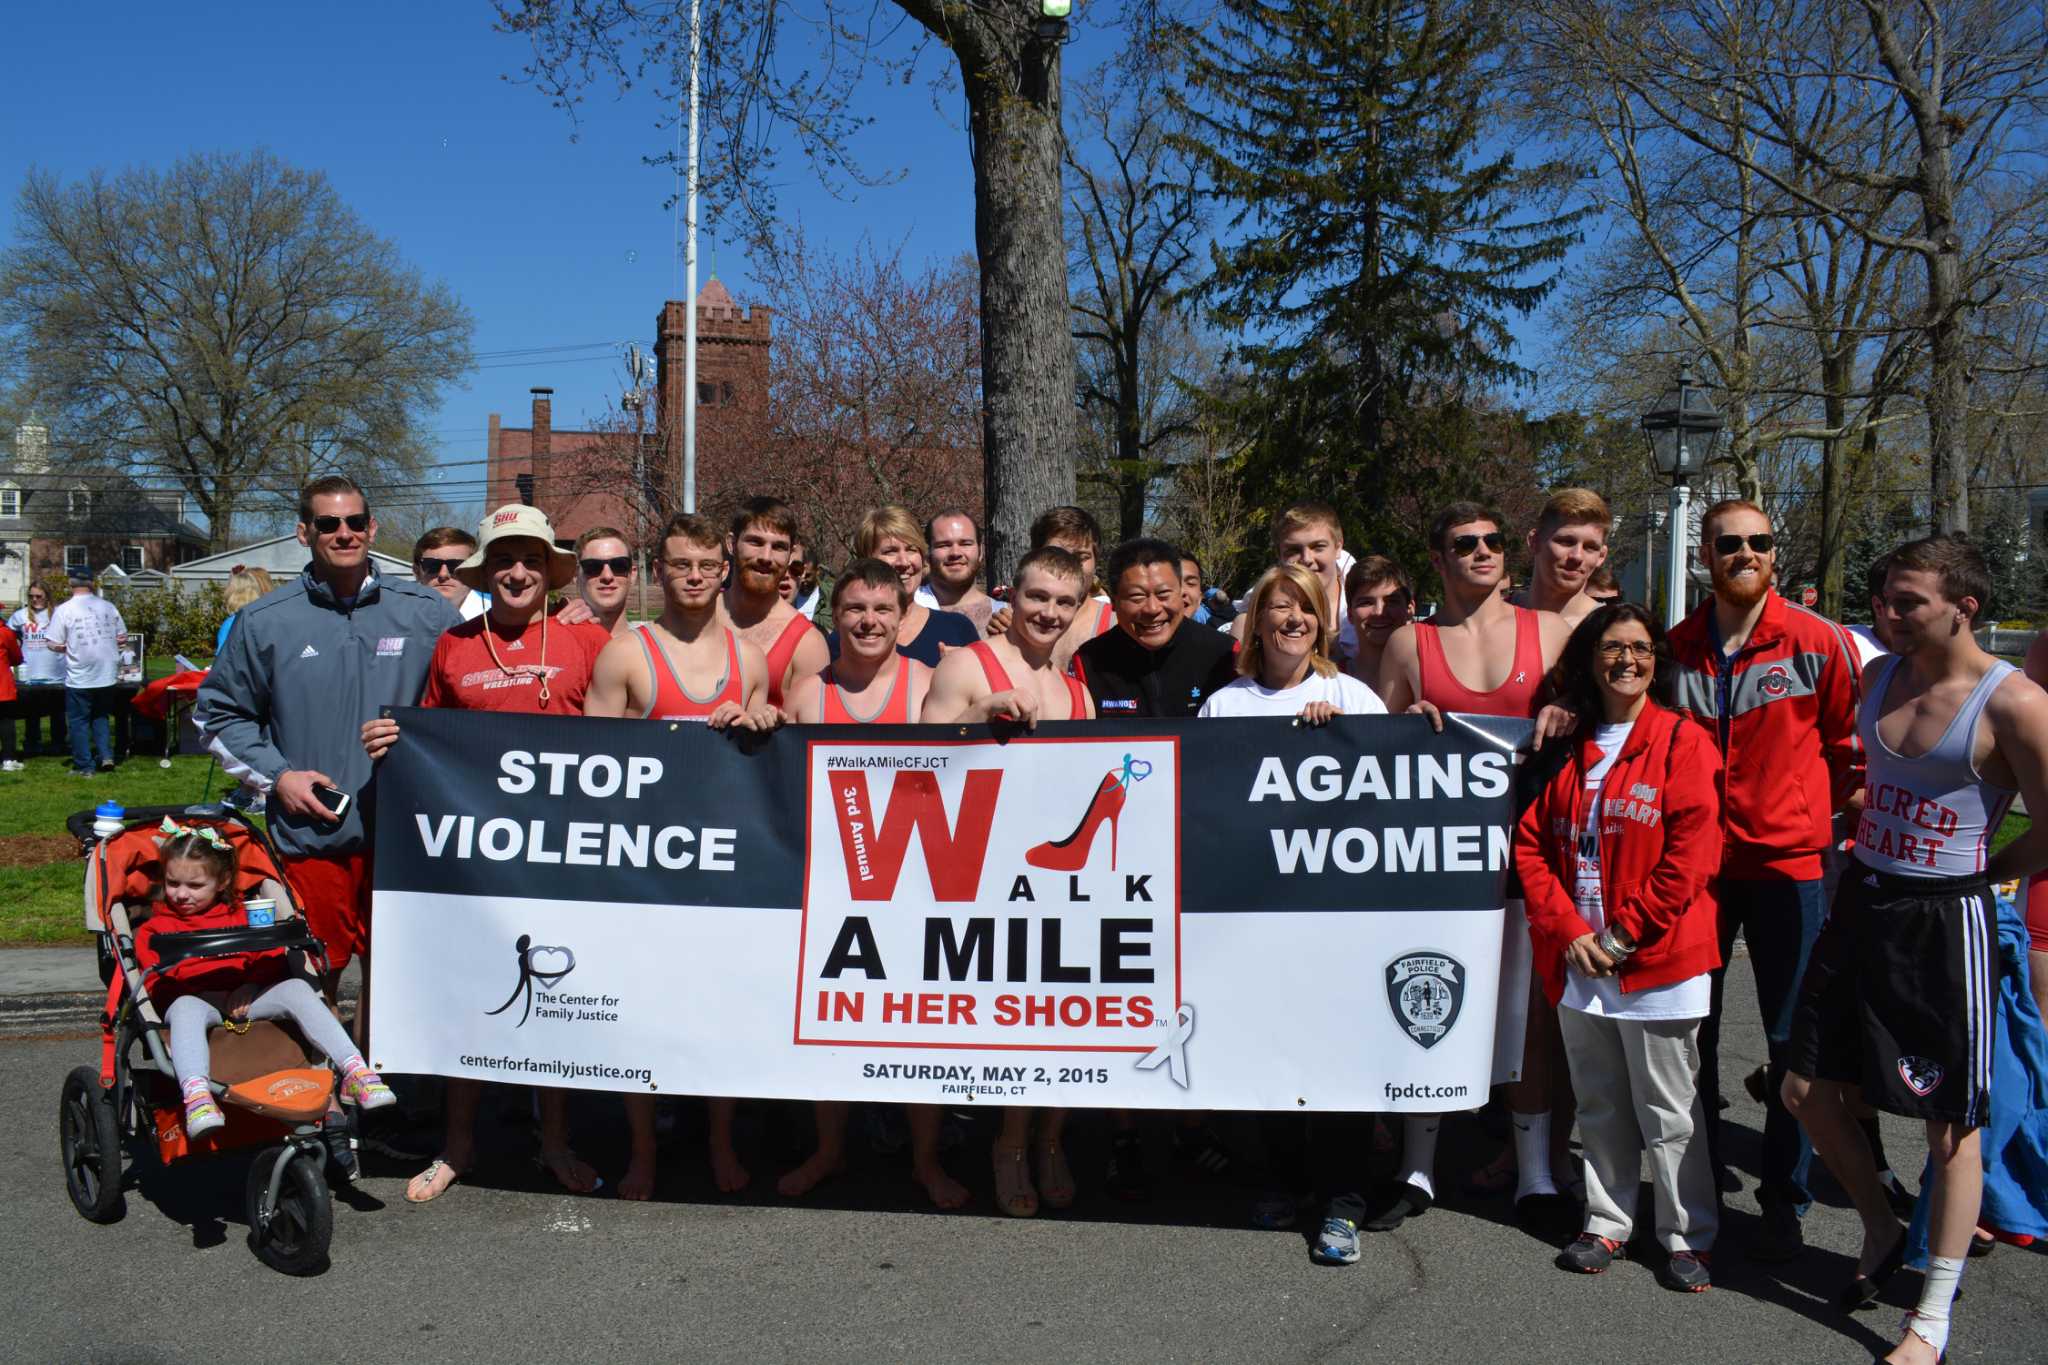 Walk a Mile in Her Shoes returns and more